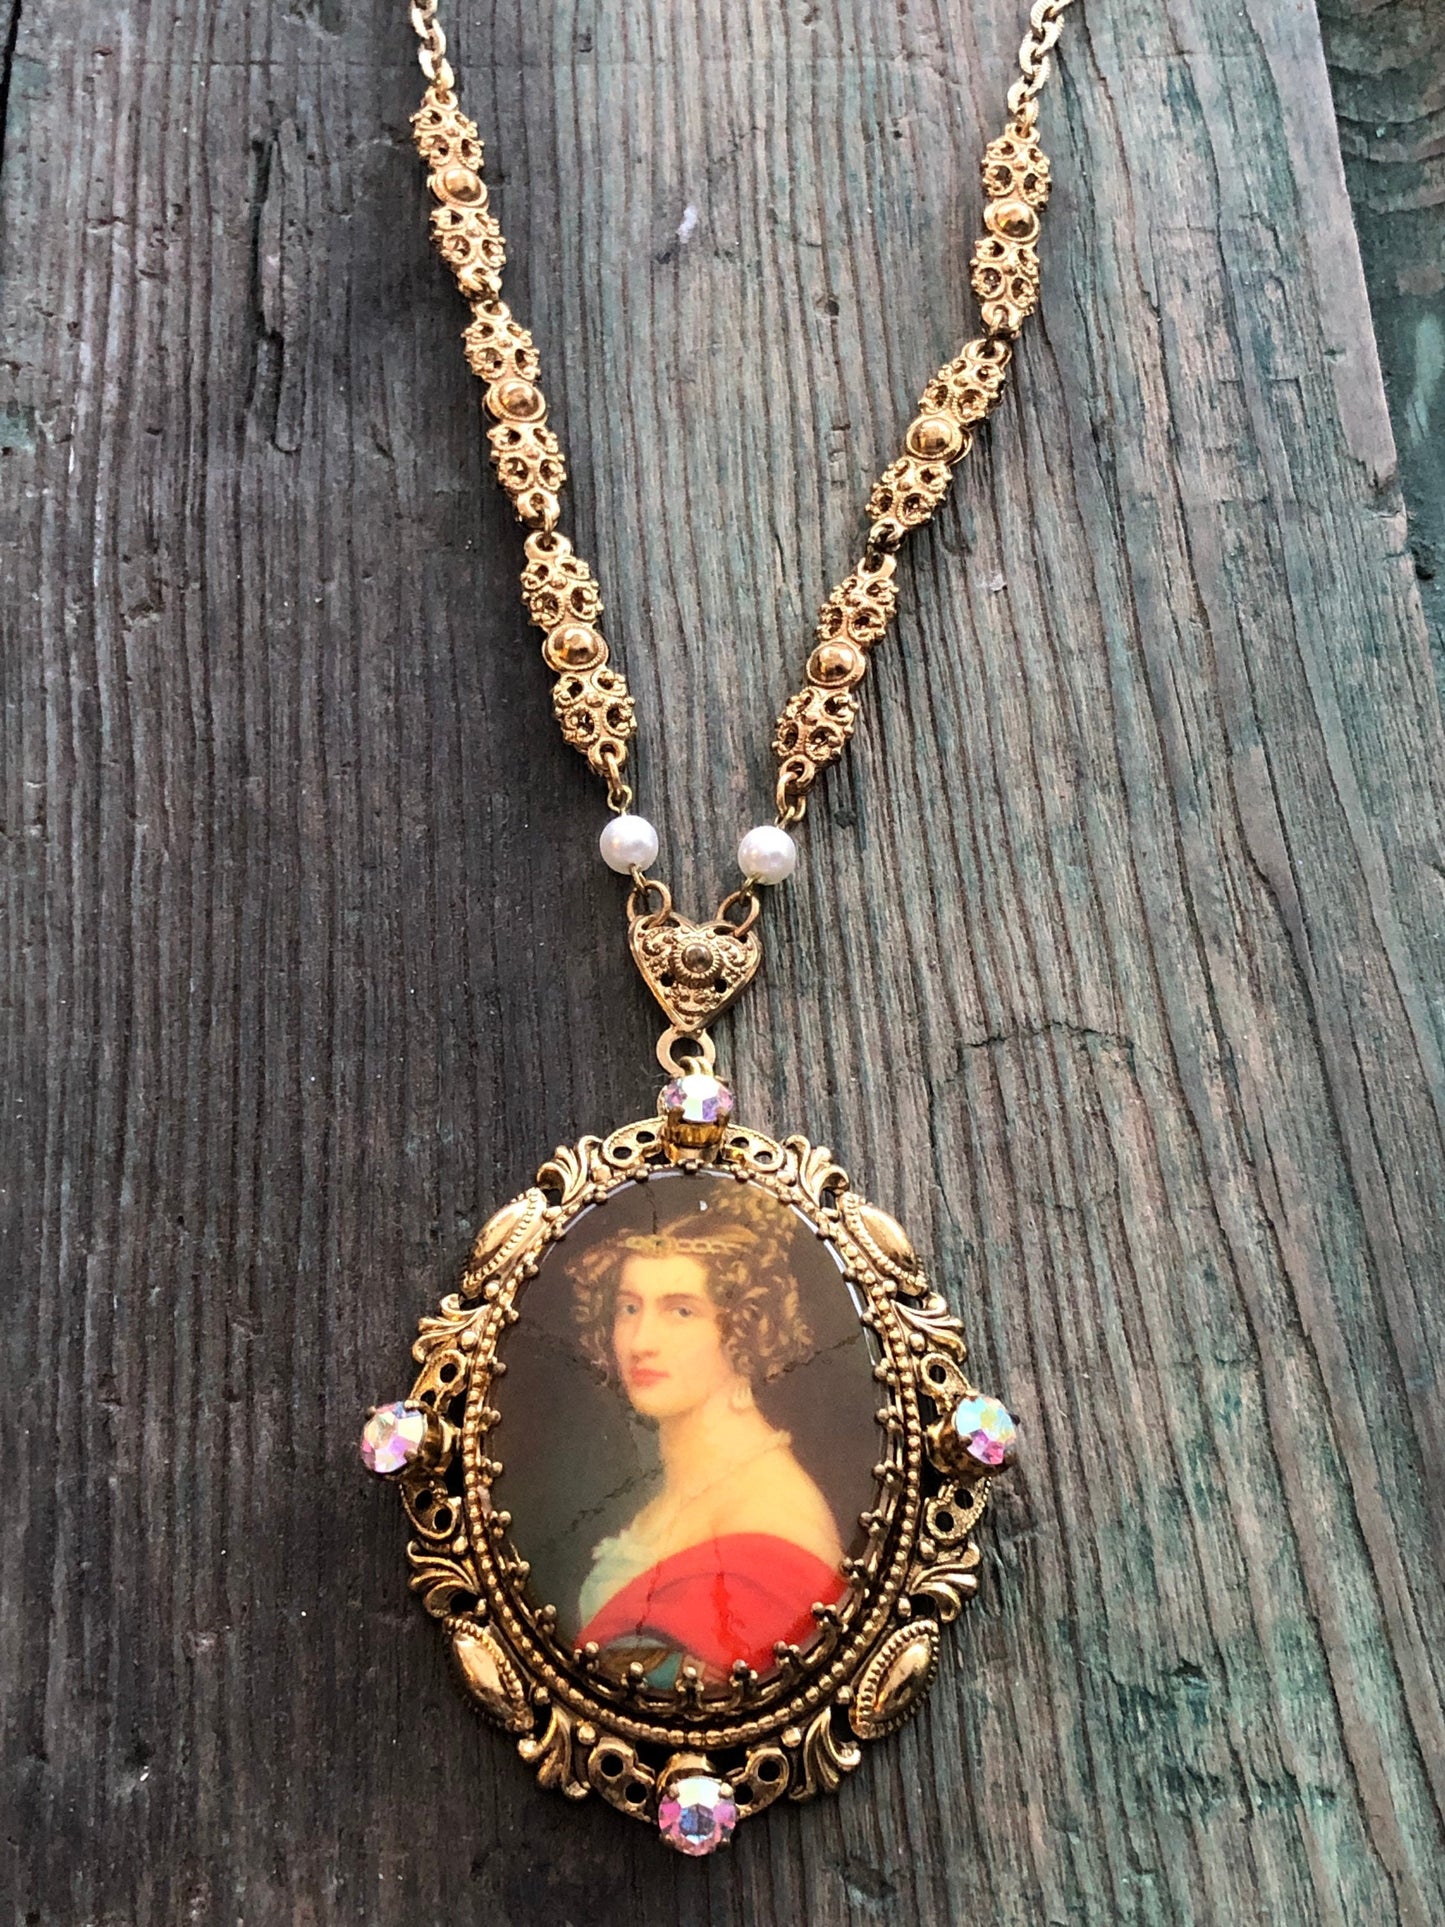 West German 1940 Vintage Limoge Portrait Cameo Gold Brass Filigree Necklace with Aurora Borealis Crystal Rhinestones and Pearls